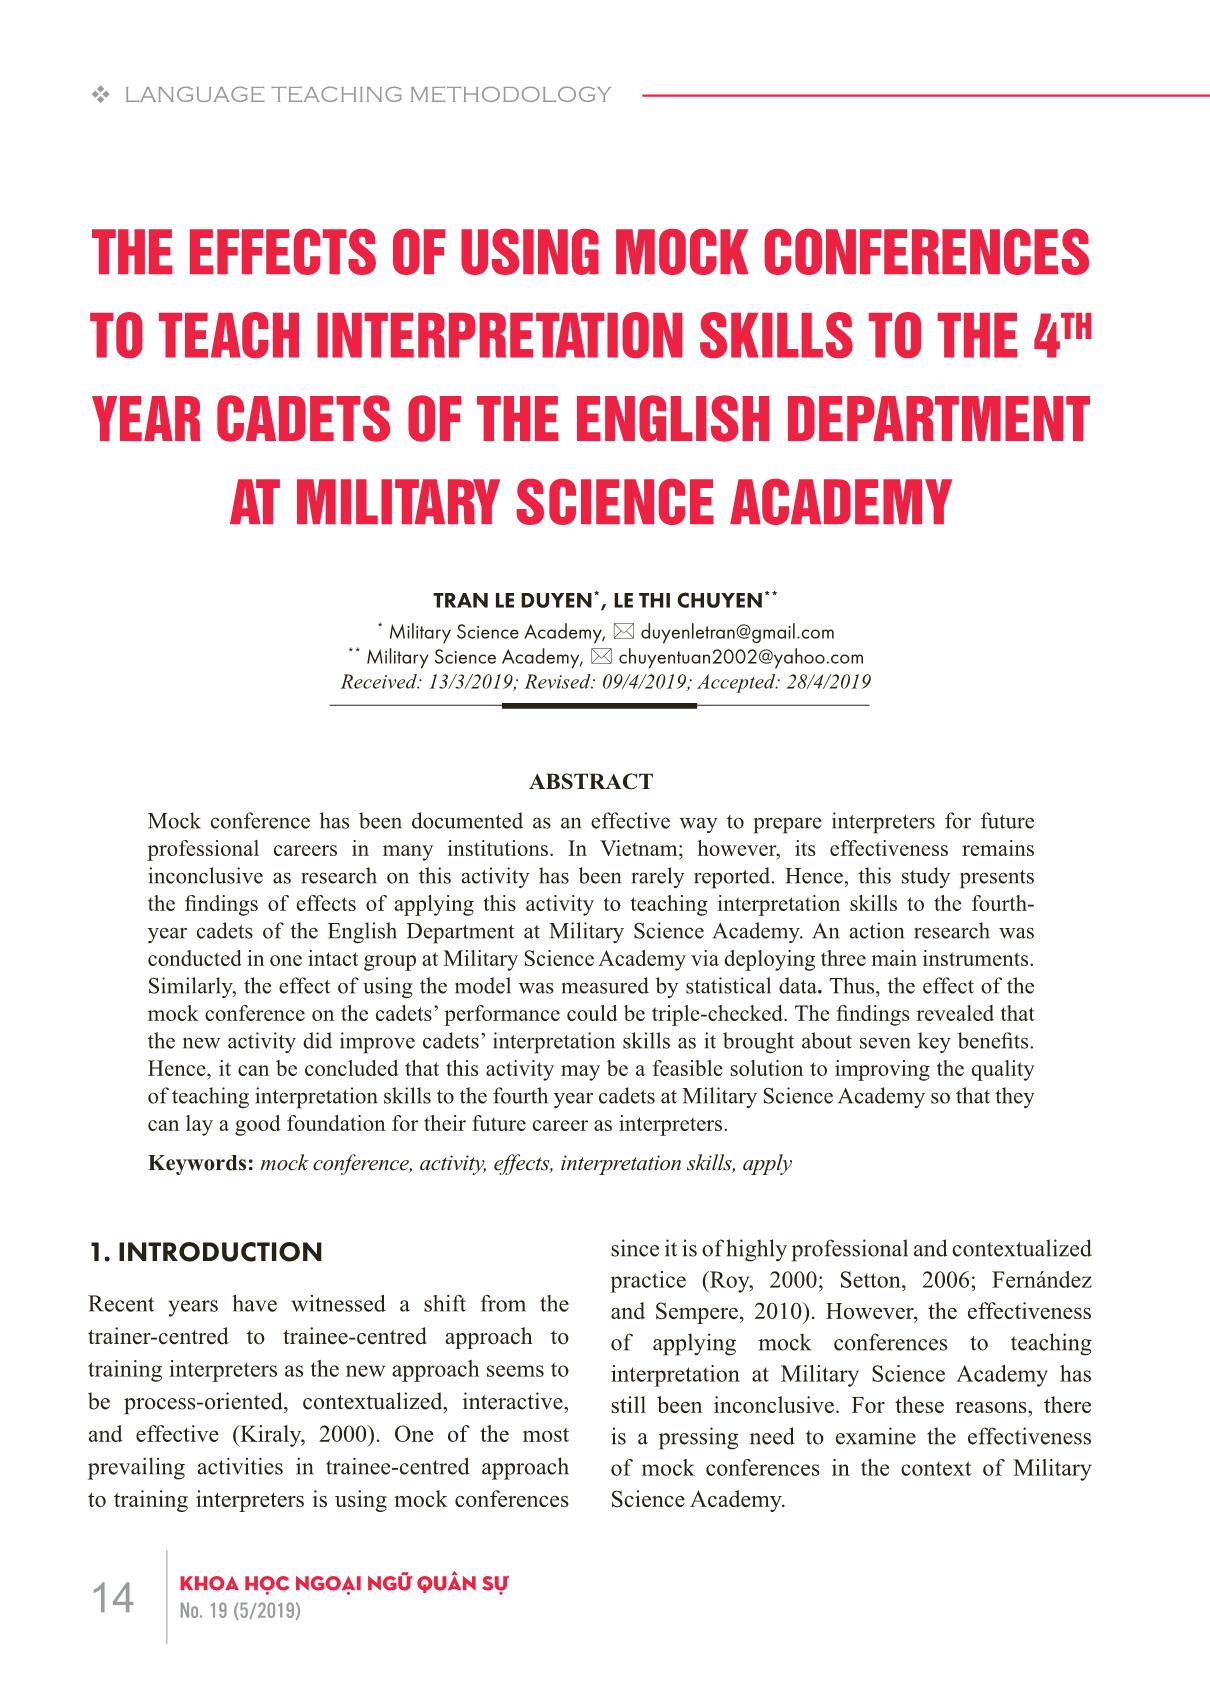 The effects of using mock conferences to teach interpretation skills to the 4th year cadets of the English department at military science academy trang 1